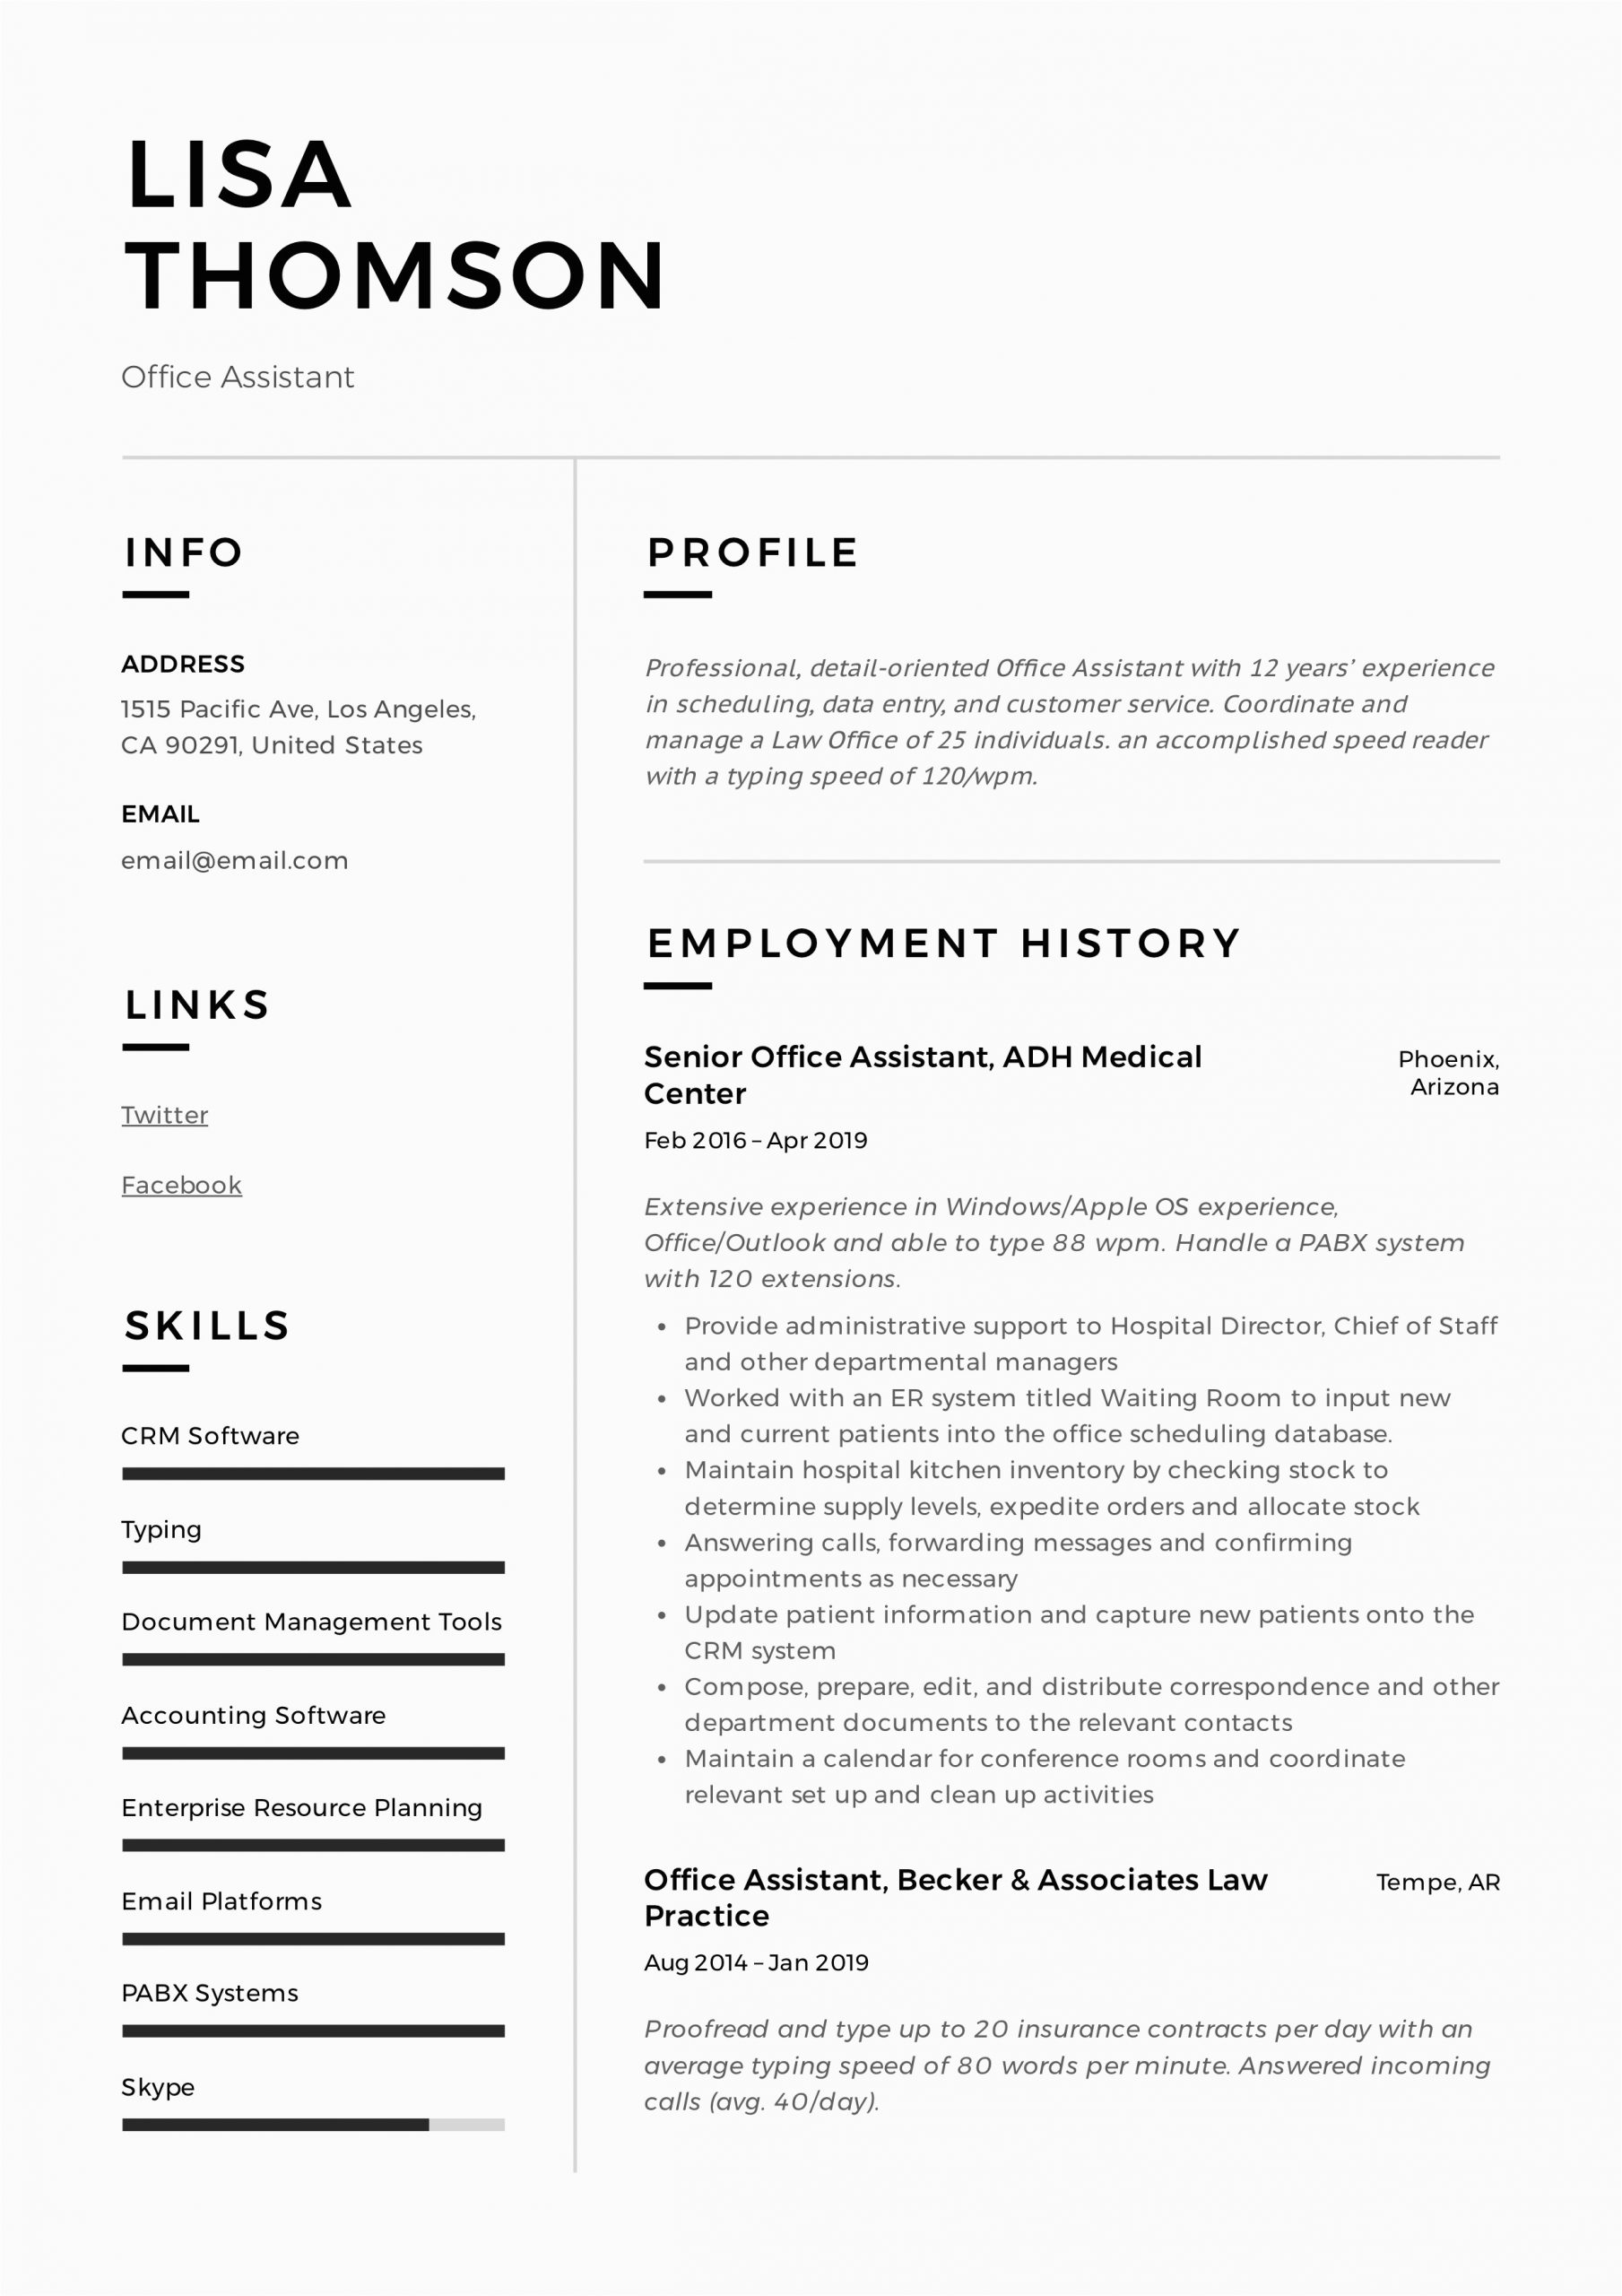 Sample Resume for Executive assistant Office Manager Fice assistant Resume Writing Guide